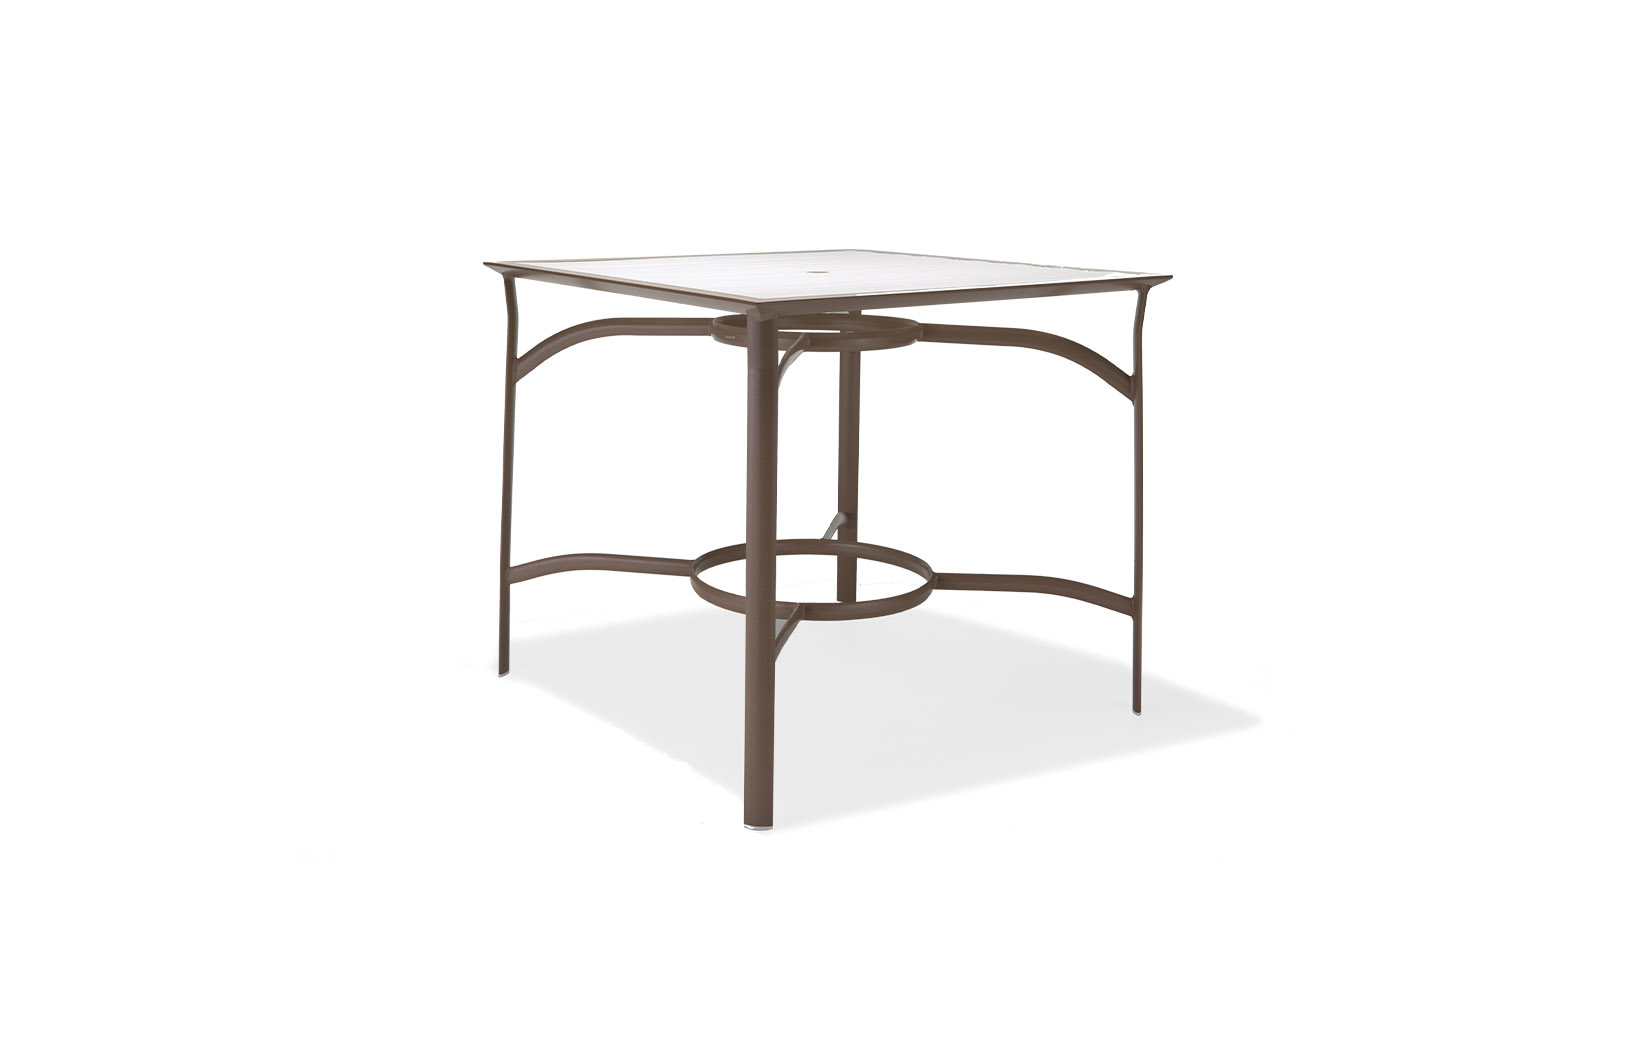 Seascape Collection 42 Inch Square Bar Table